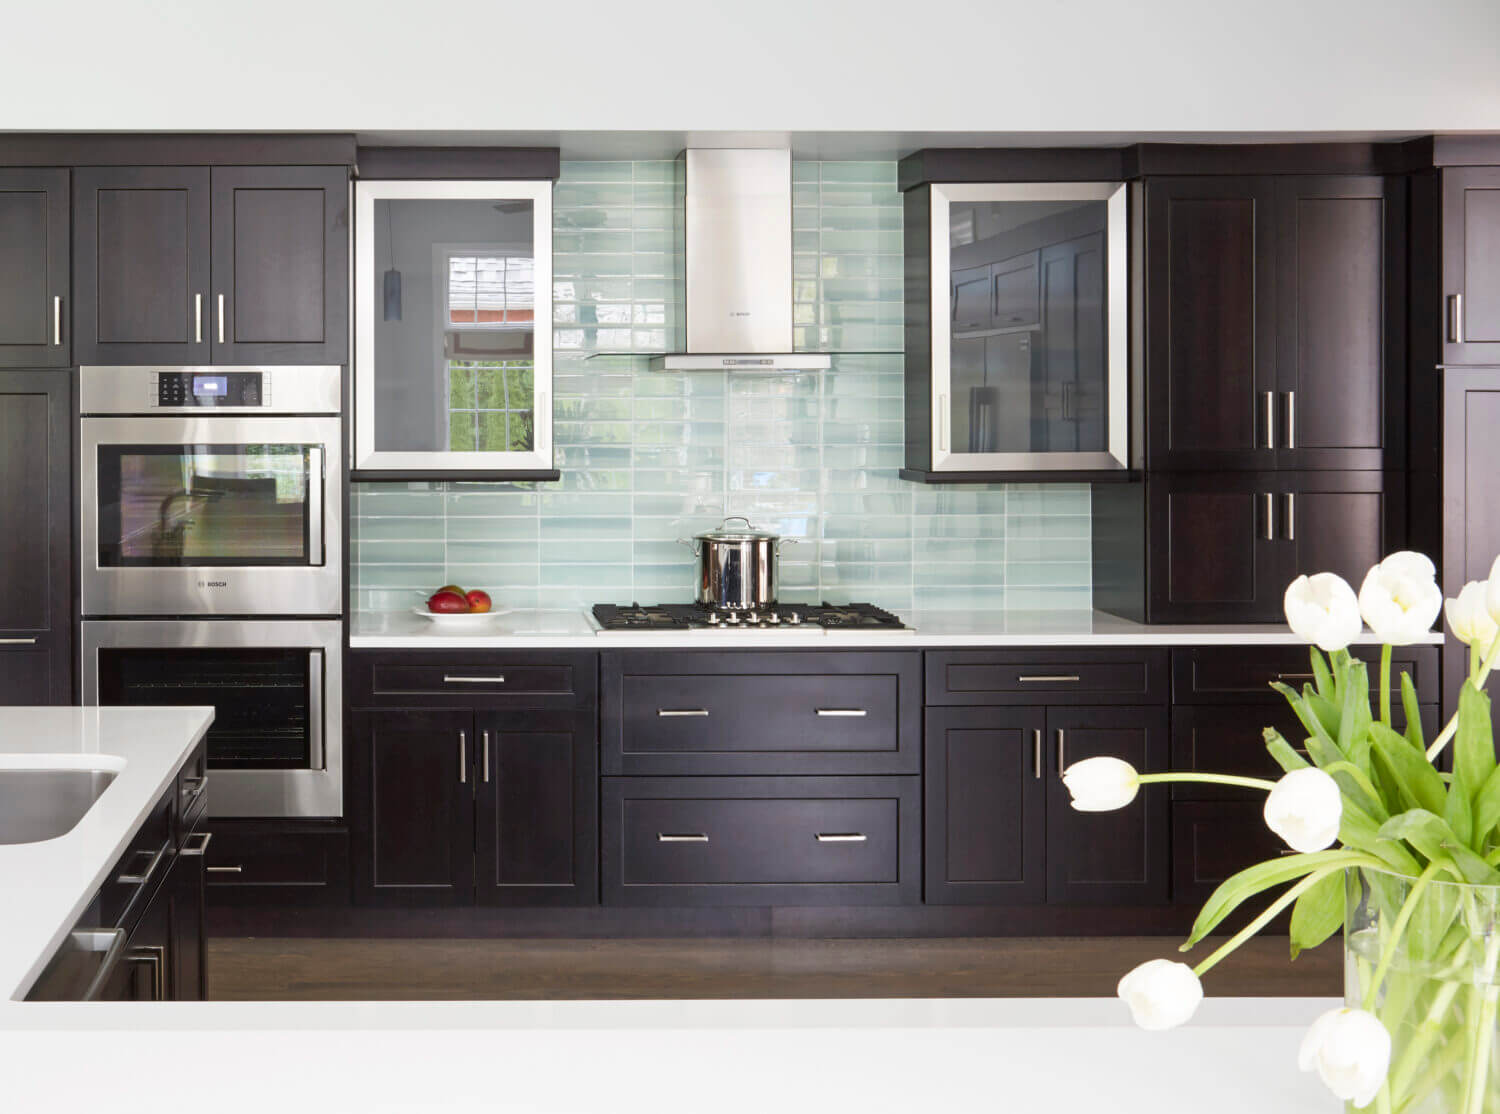 Kitchen Design: Cooking with Gas or Electric? - Dura Supreme Cabinetry